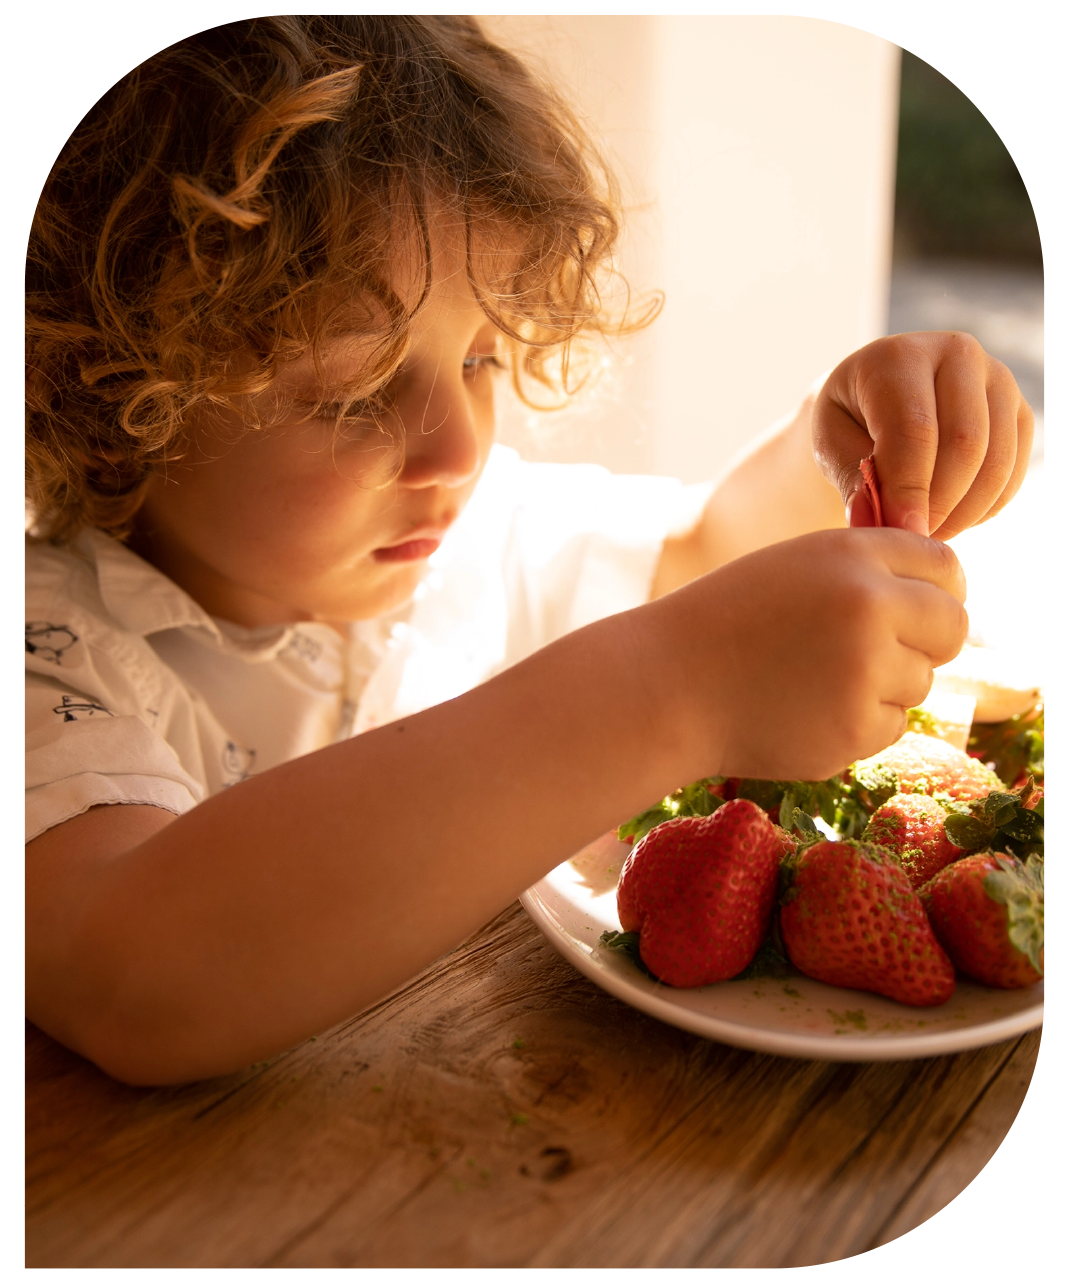 Is it hard to get your kids to eat their vegetables daily?